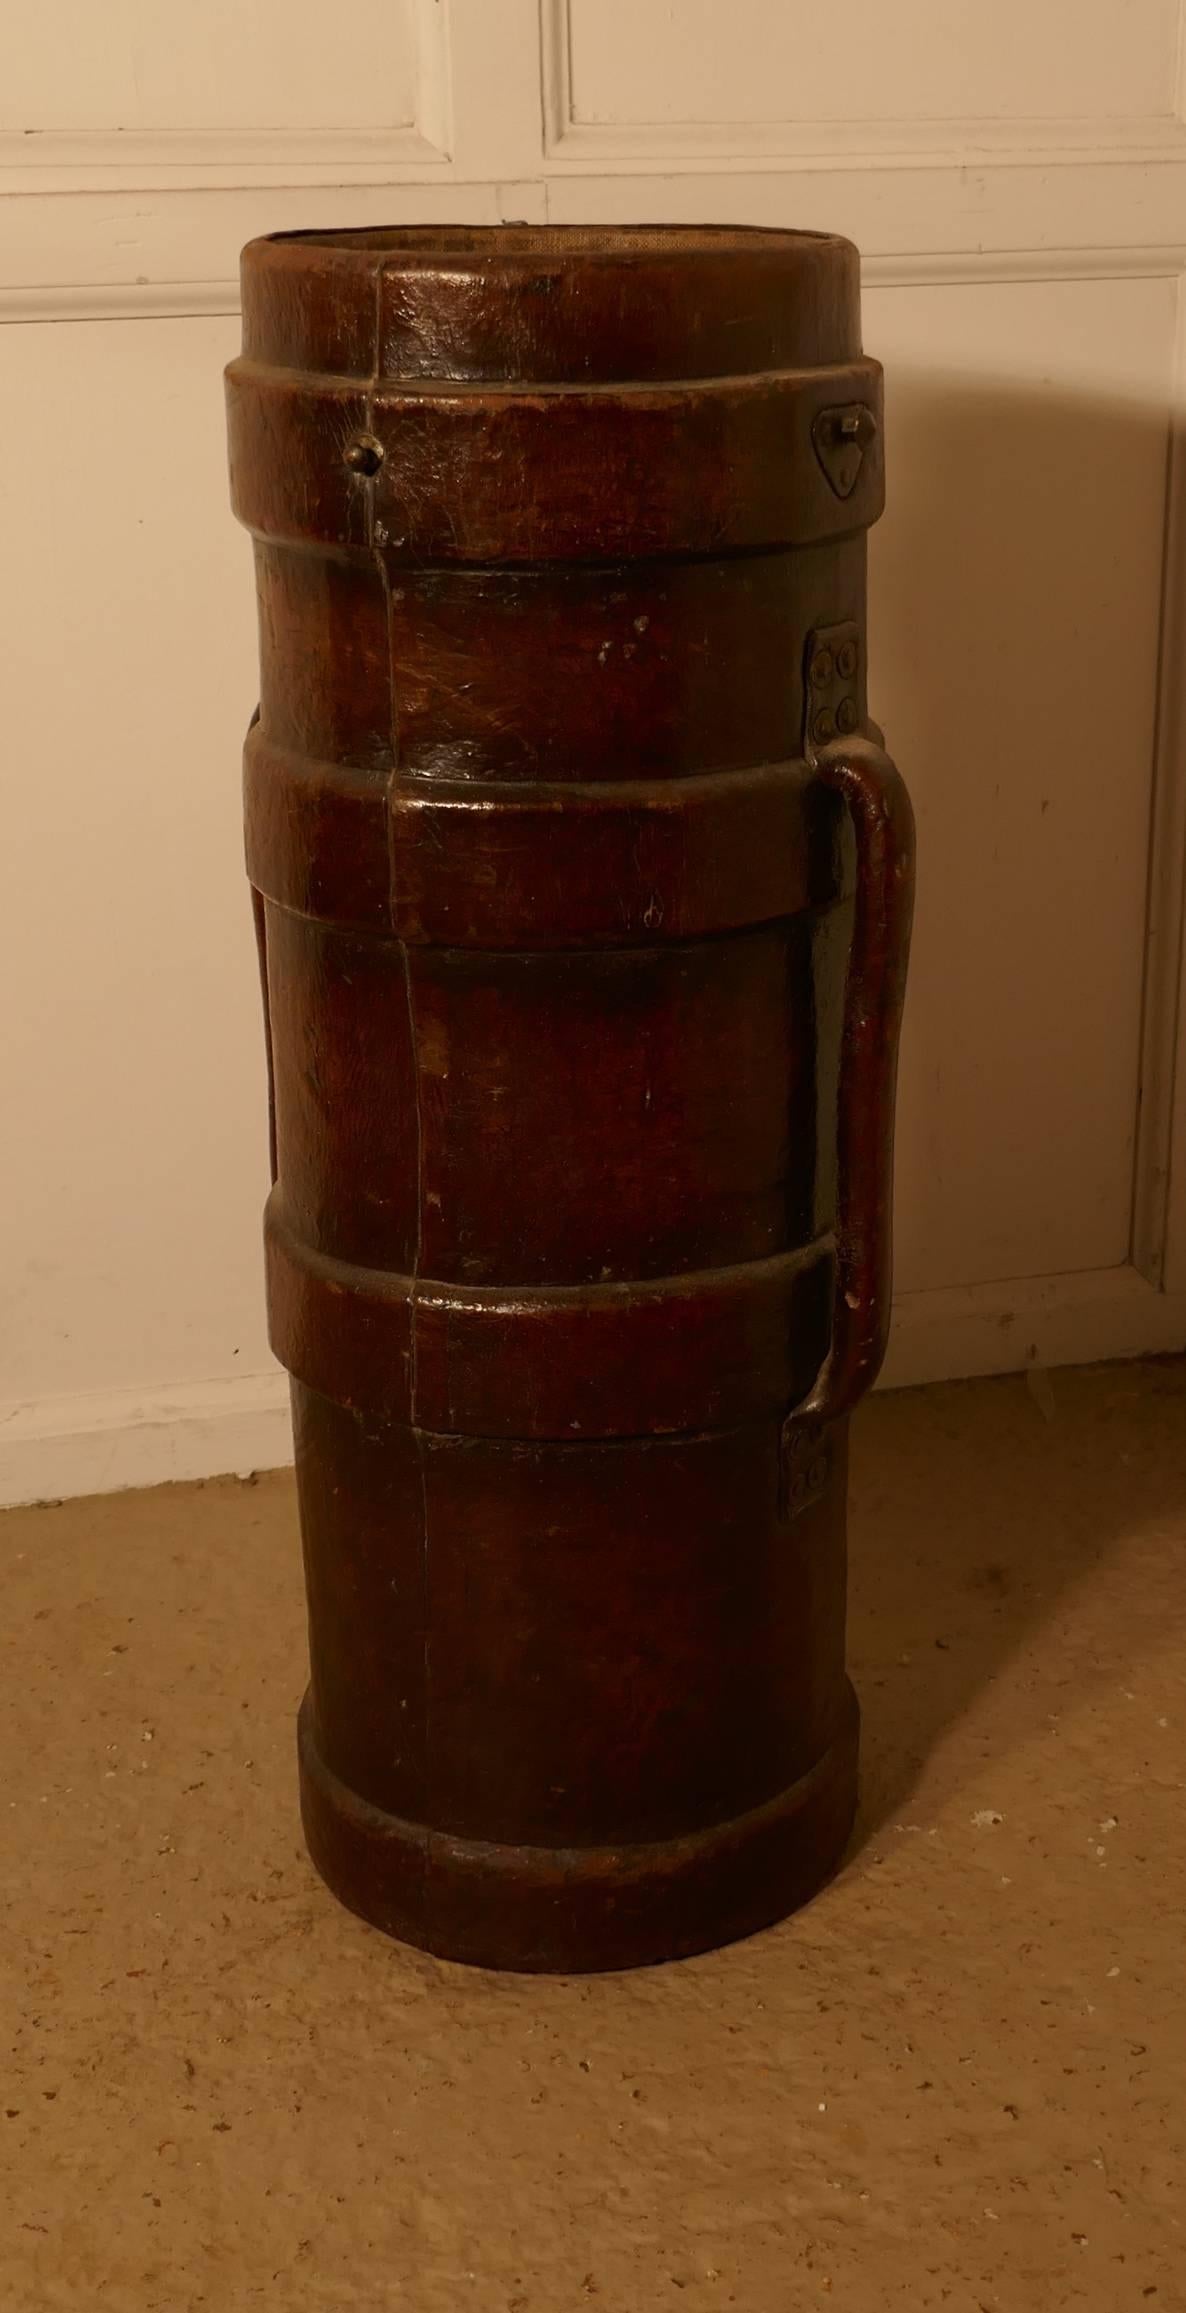 Quirky leather umbrella stand, or WWI moulded leather artillery shell carrier with three reinforced bands

This really handsome piece would make a fantastic umbrella or stick stand.

This is an extremely rare early 20th century British leather